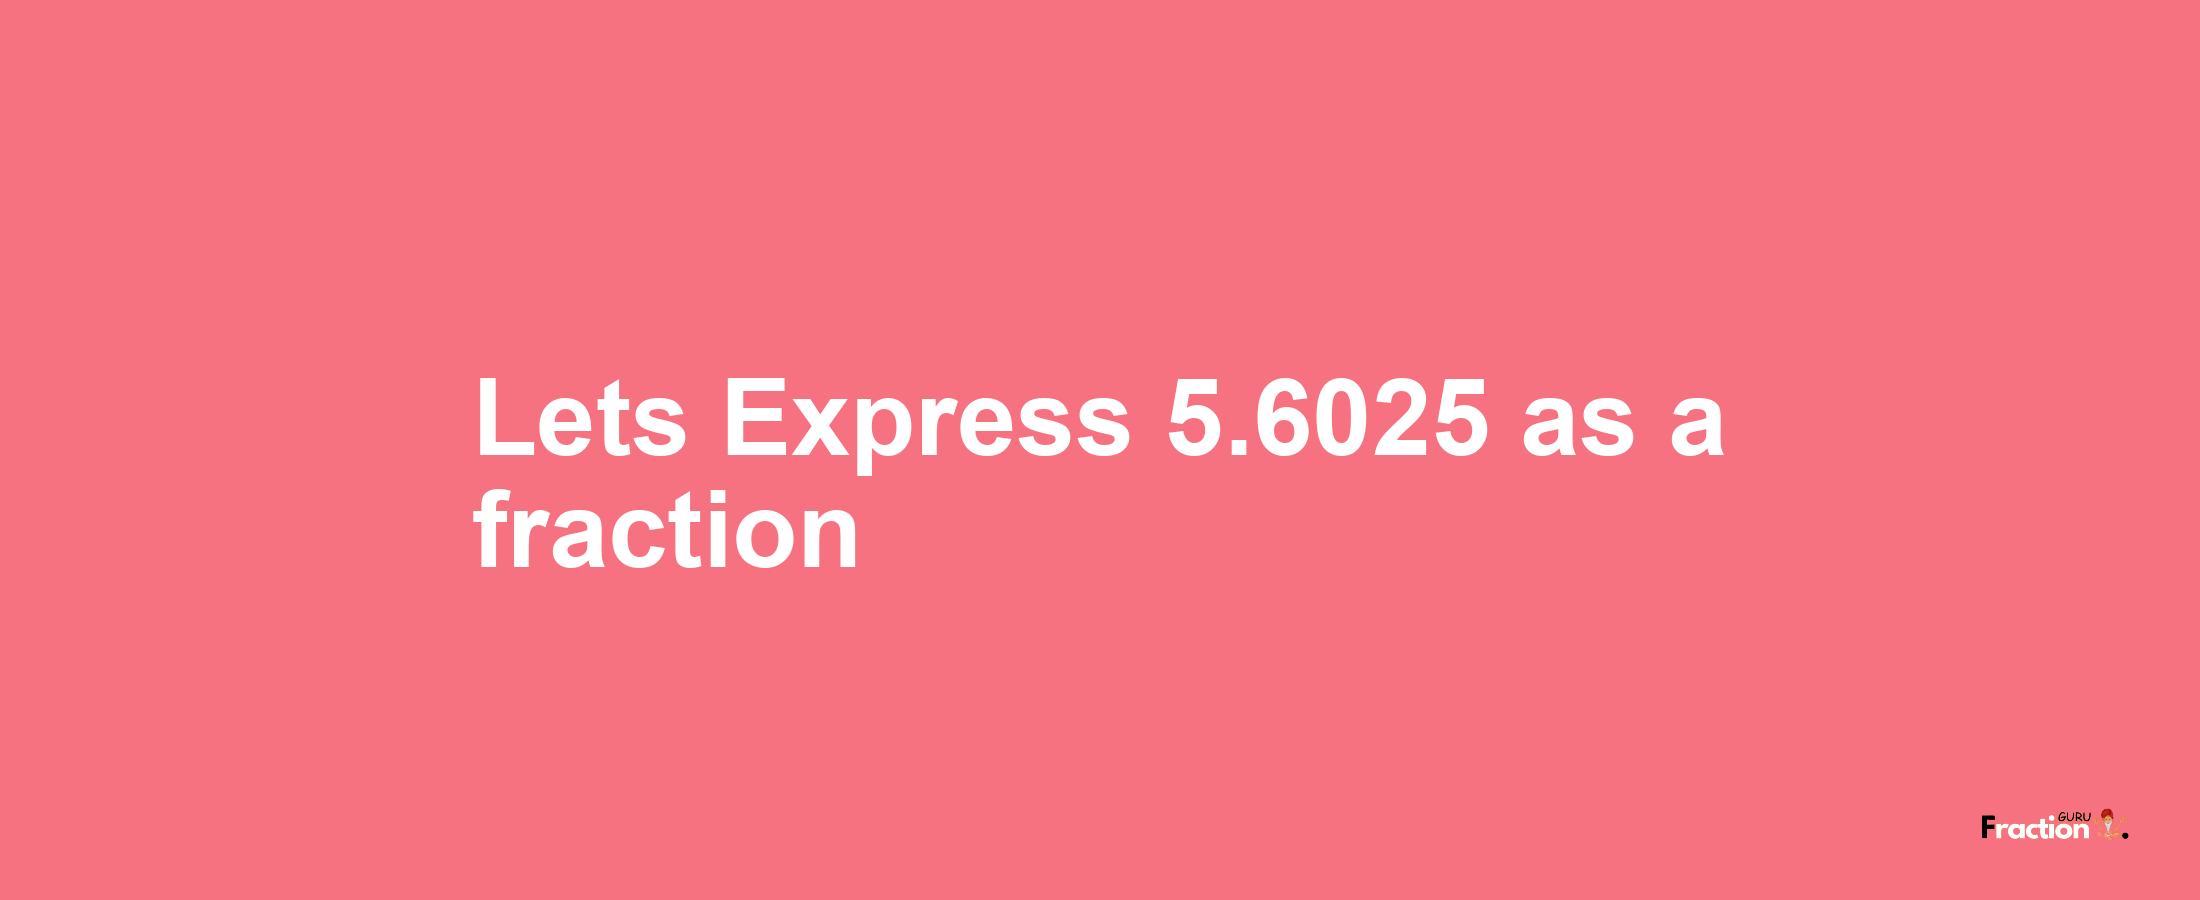 Lets Express 5.6025 as afraction